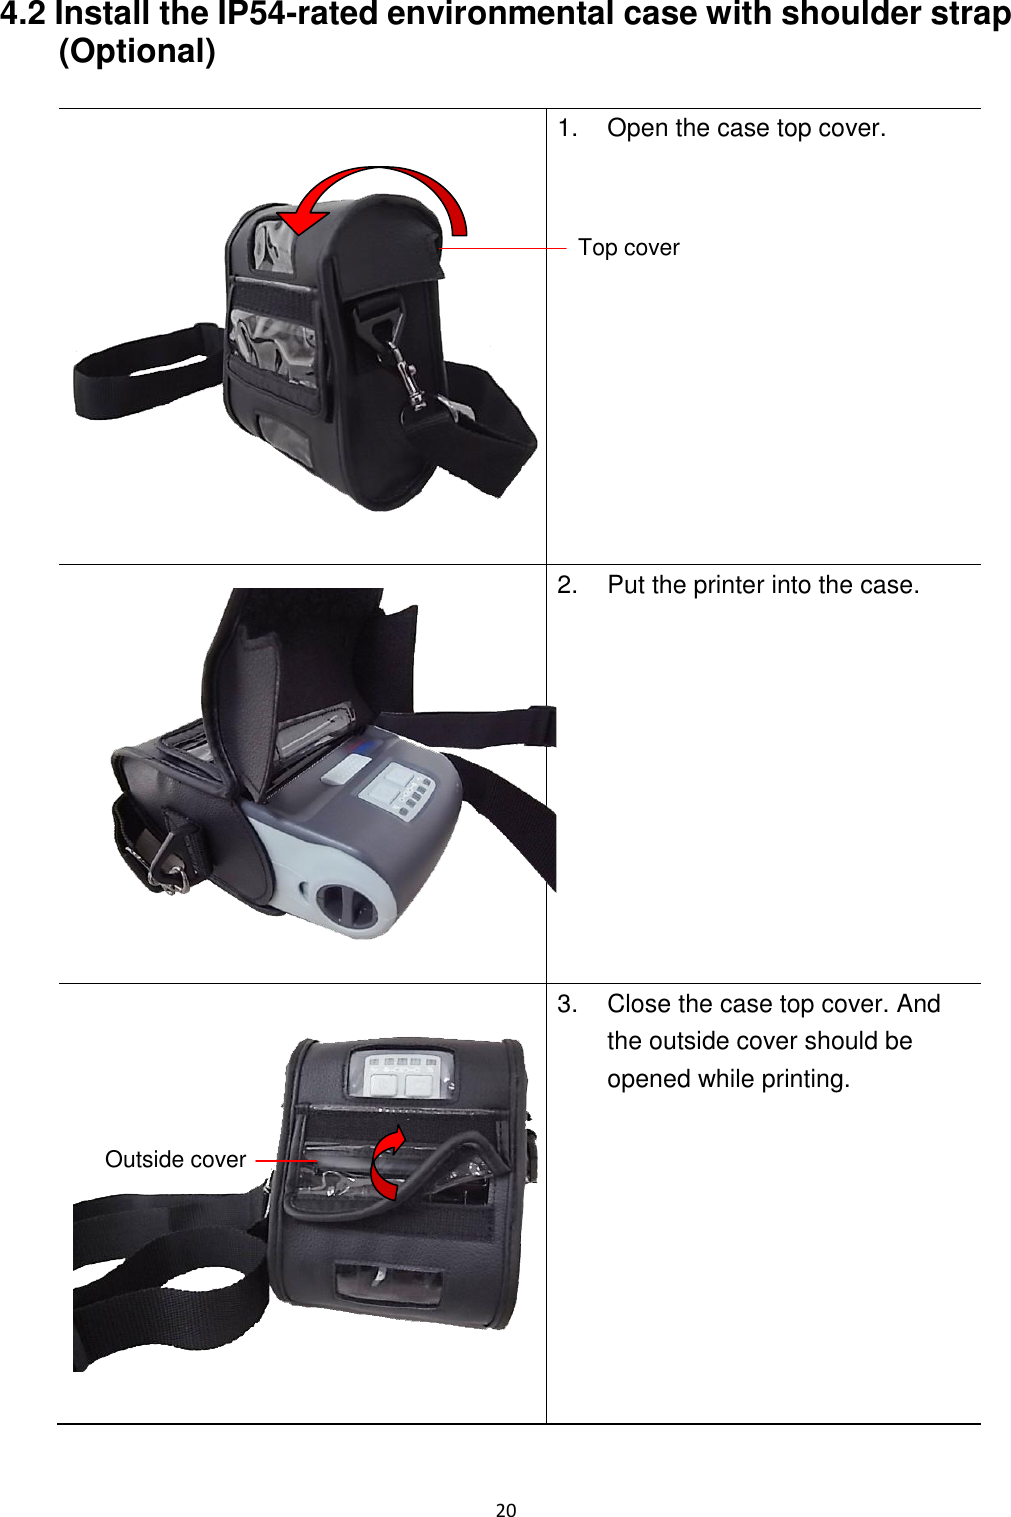 20  4.2 Install the IP54-rated environmental case with shoulder strap (Optional)     1.  Open the case top cover.  2.  Put the printer into the case.  3.  Close the case top cover. And the outside cover should be opened while printing.  Top cover Outside cover 